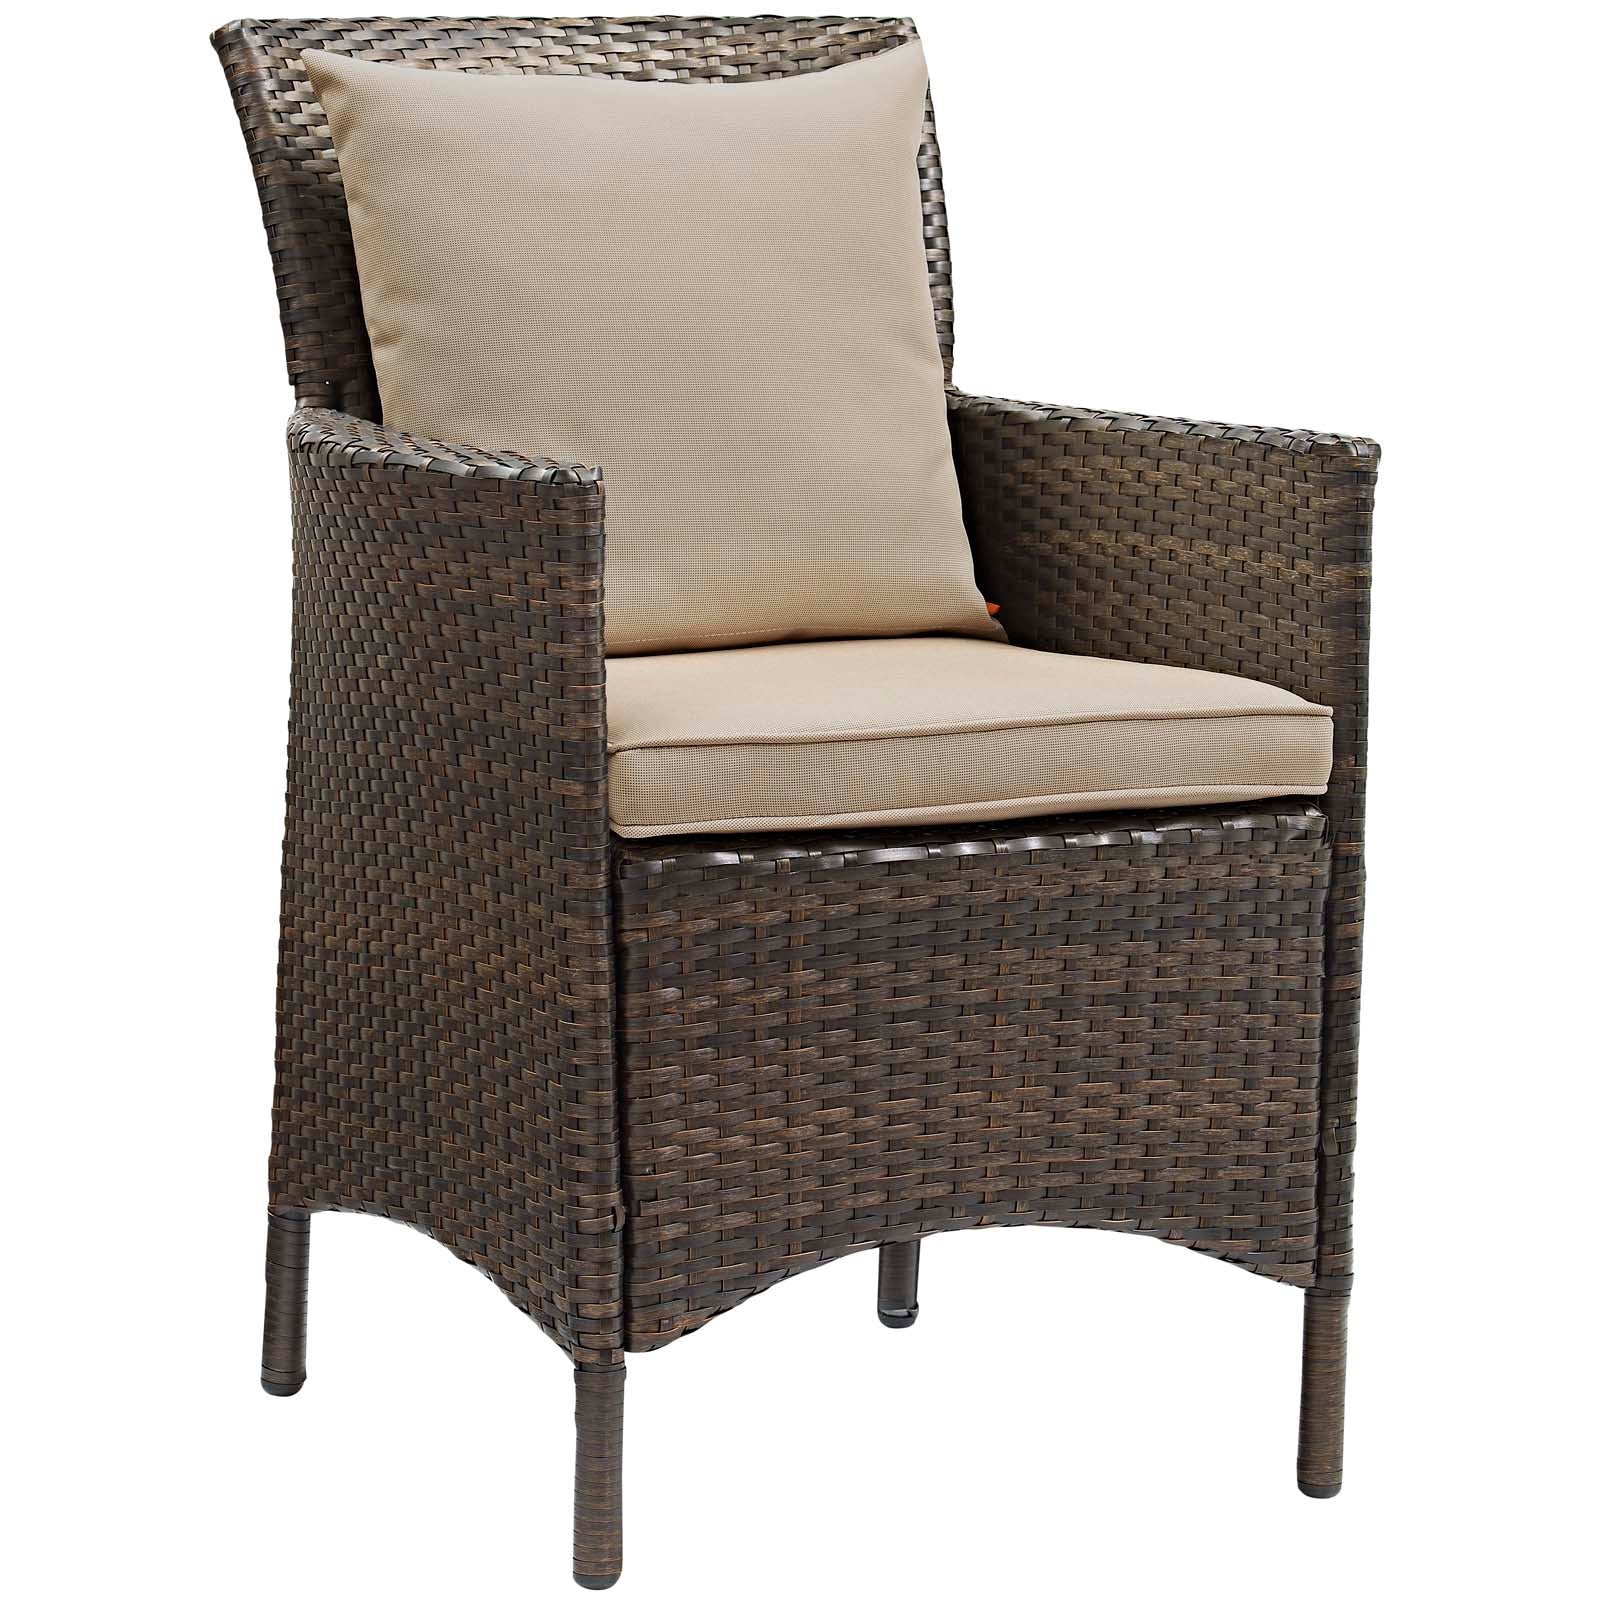 Modway Outdoor Dining Chairs - Conduit Outdoor Patio Wicker Rattan Dining Armchair Set of 2 Brown Beige